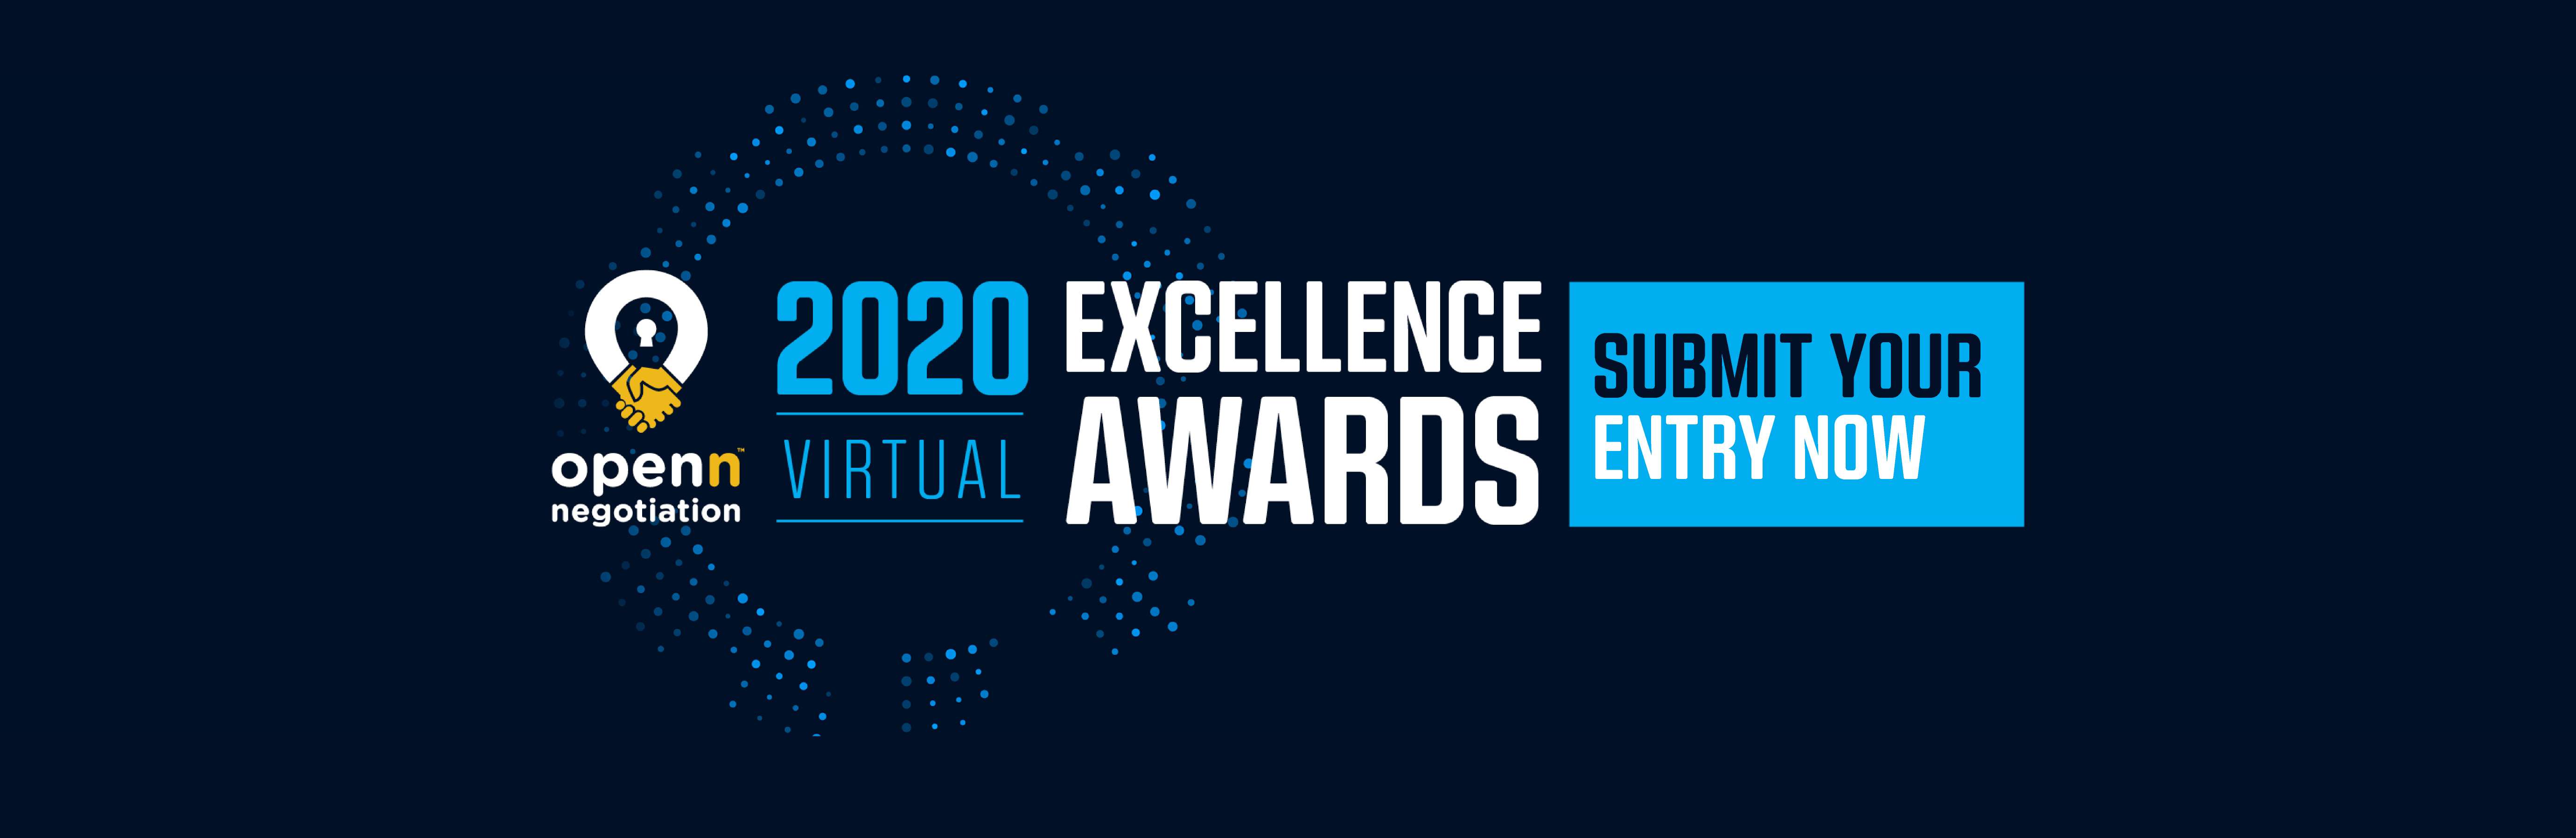 Excellence-awards-banner--SUBMIT-ENTRY